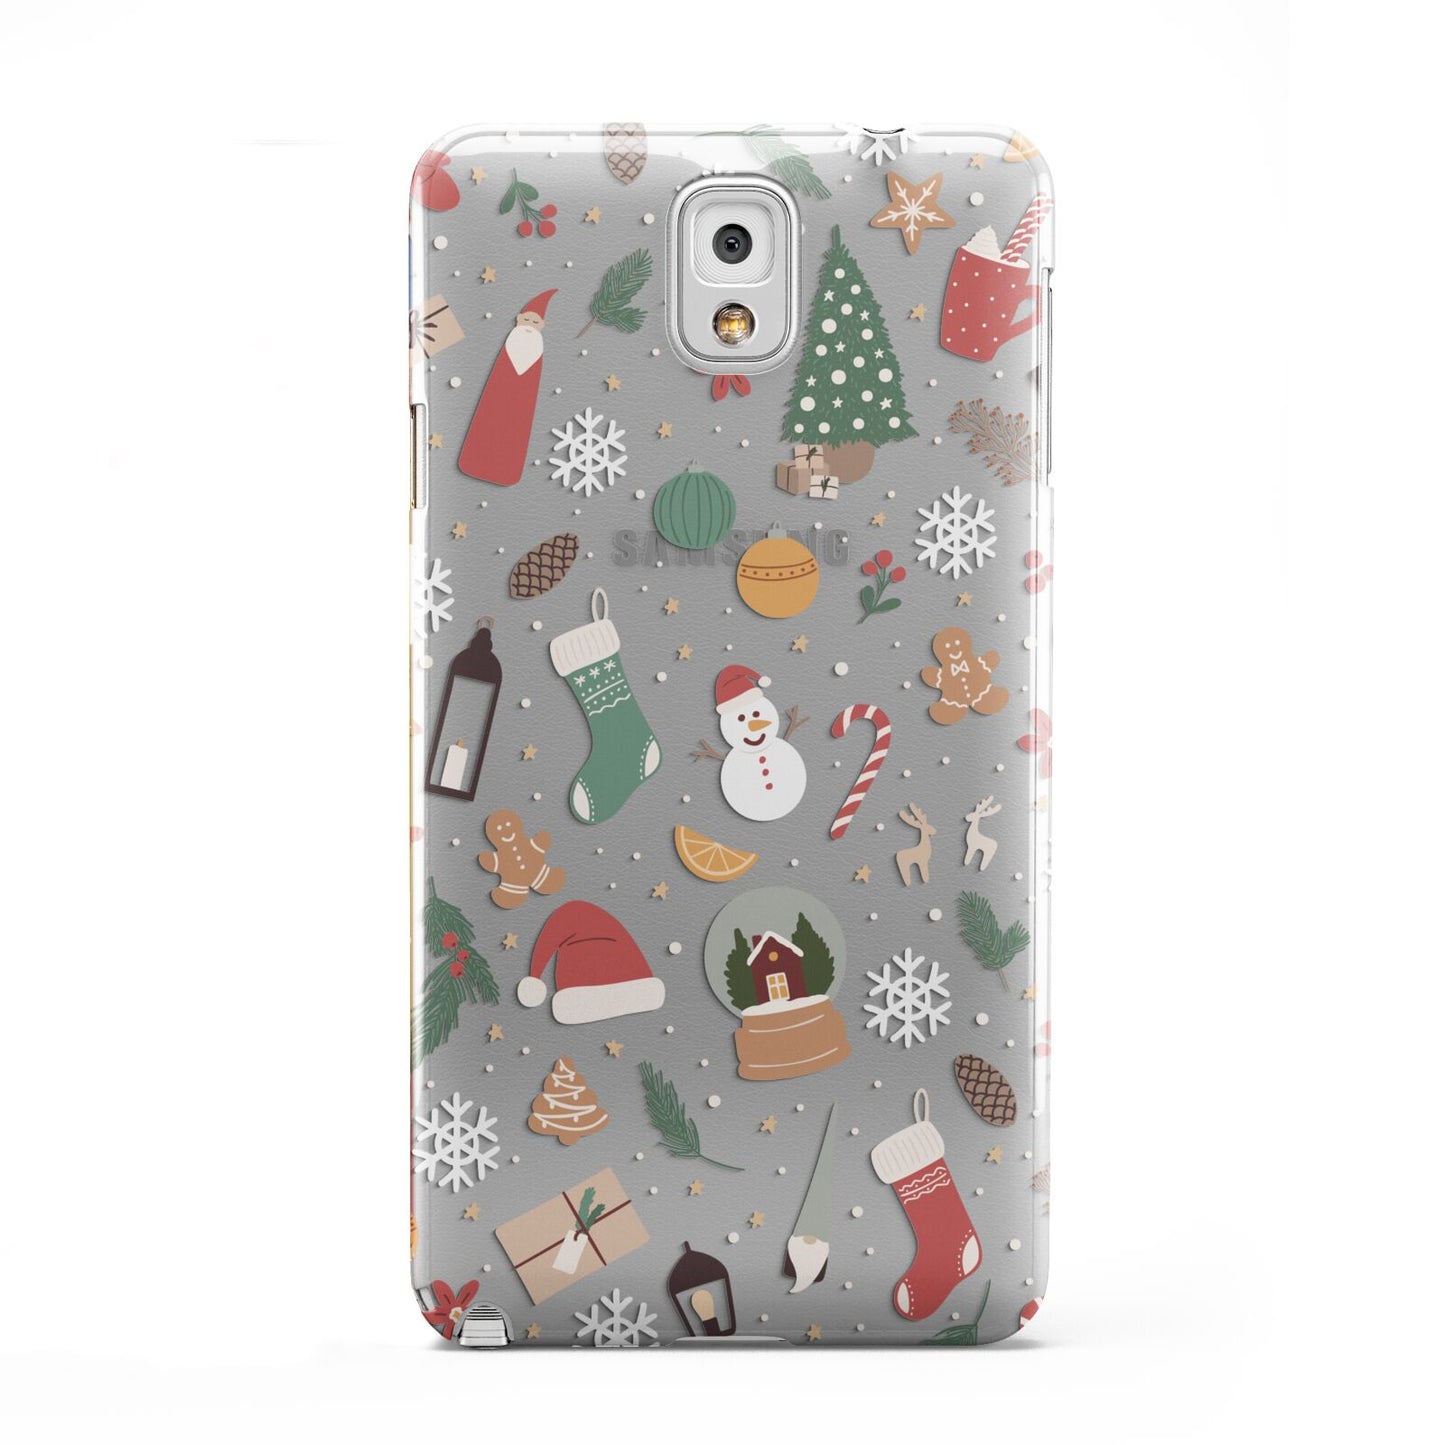 Christmas Assortments Samsung Galaxy Note 3 Case